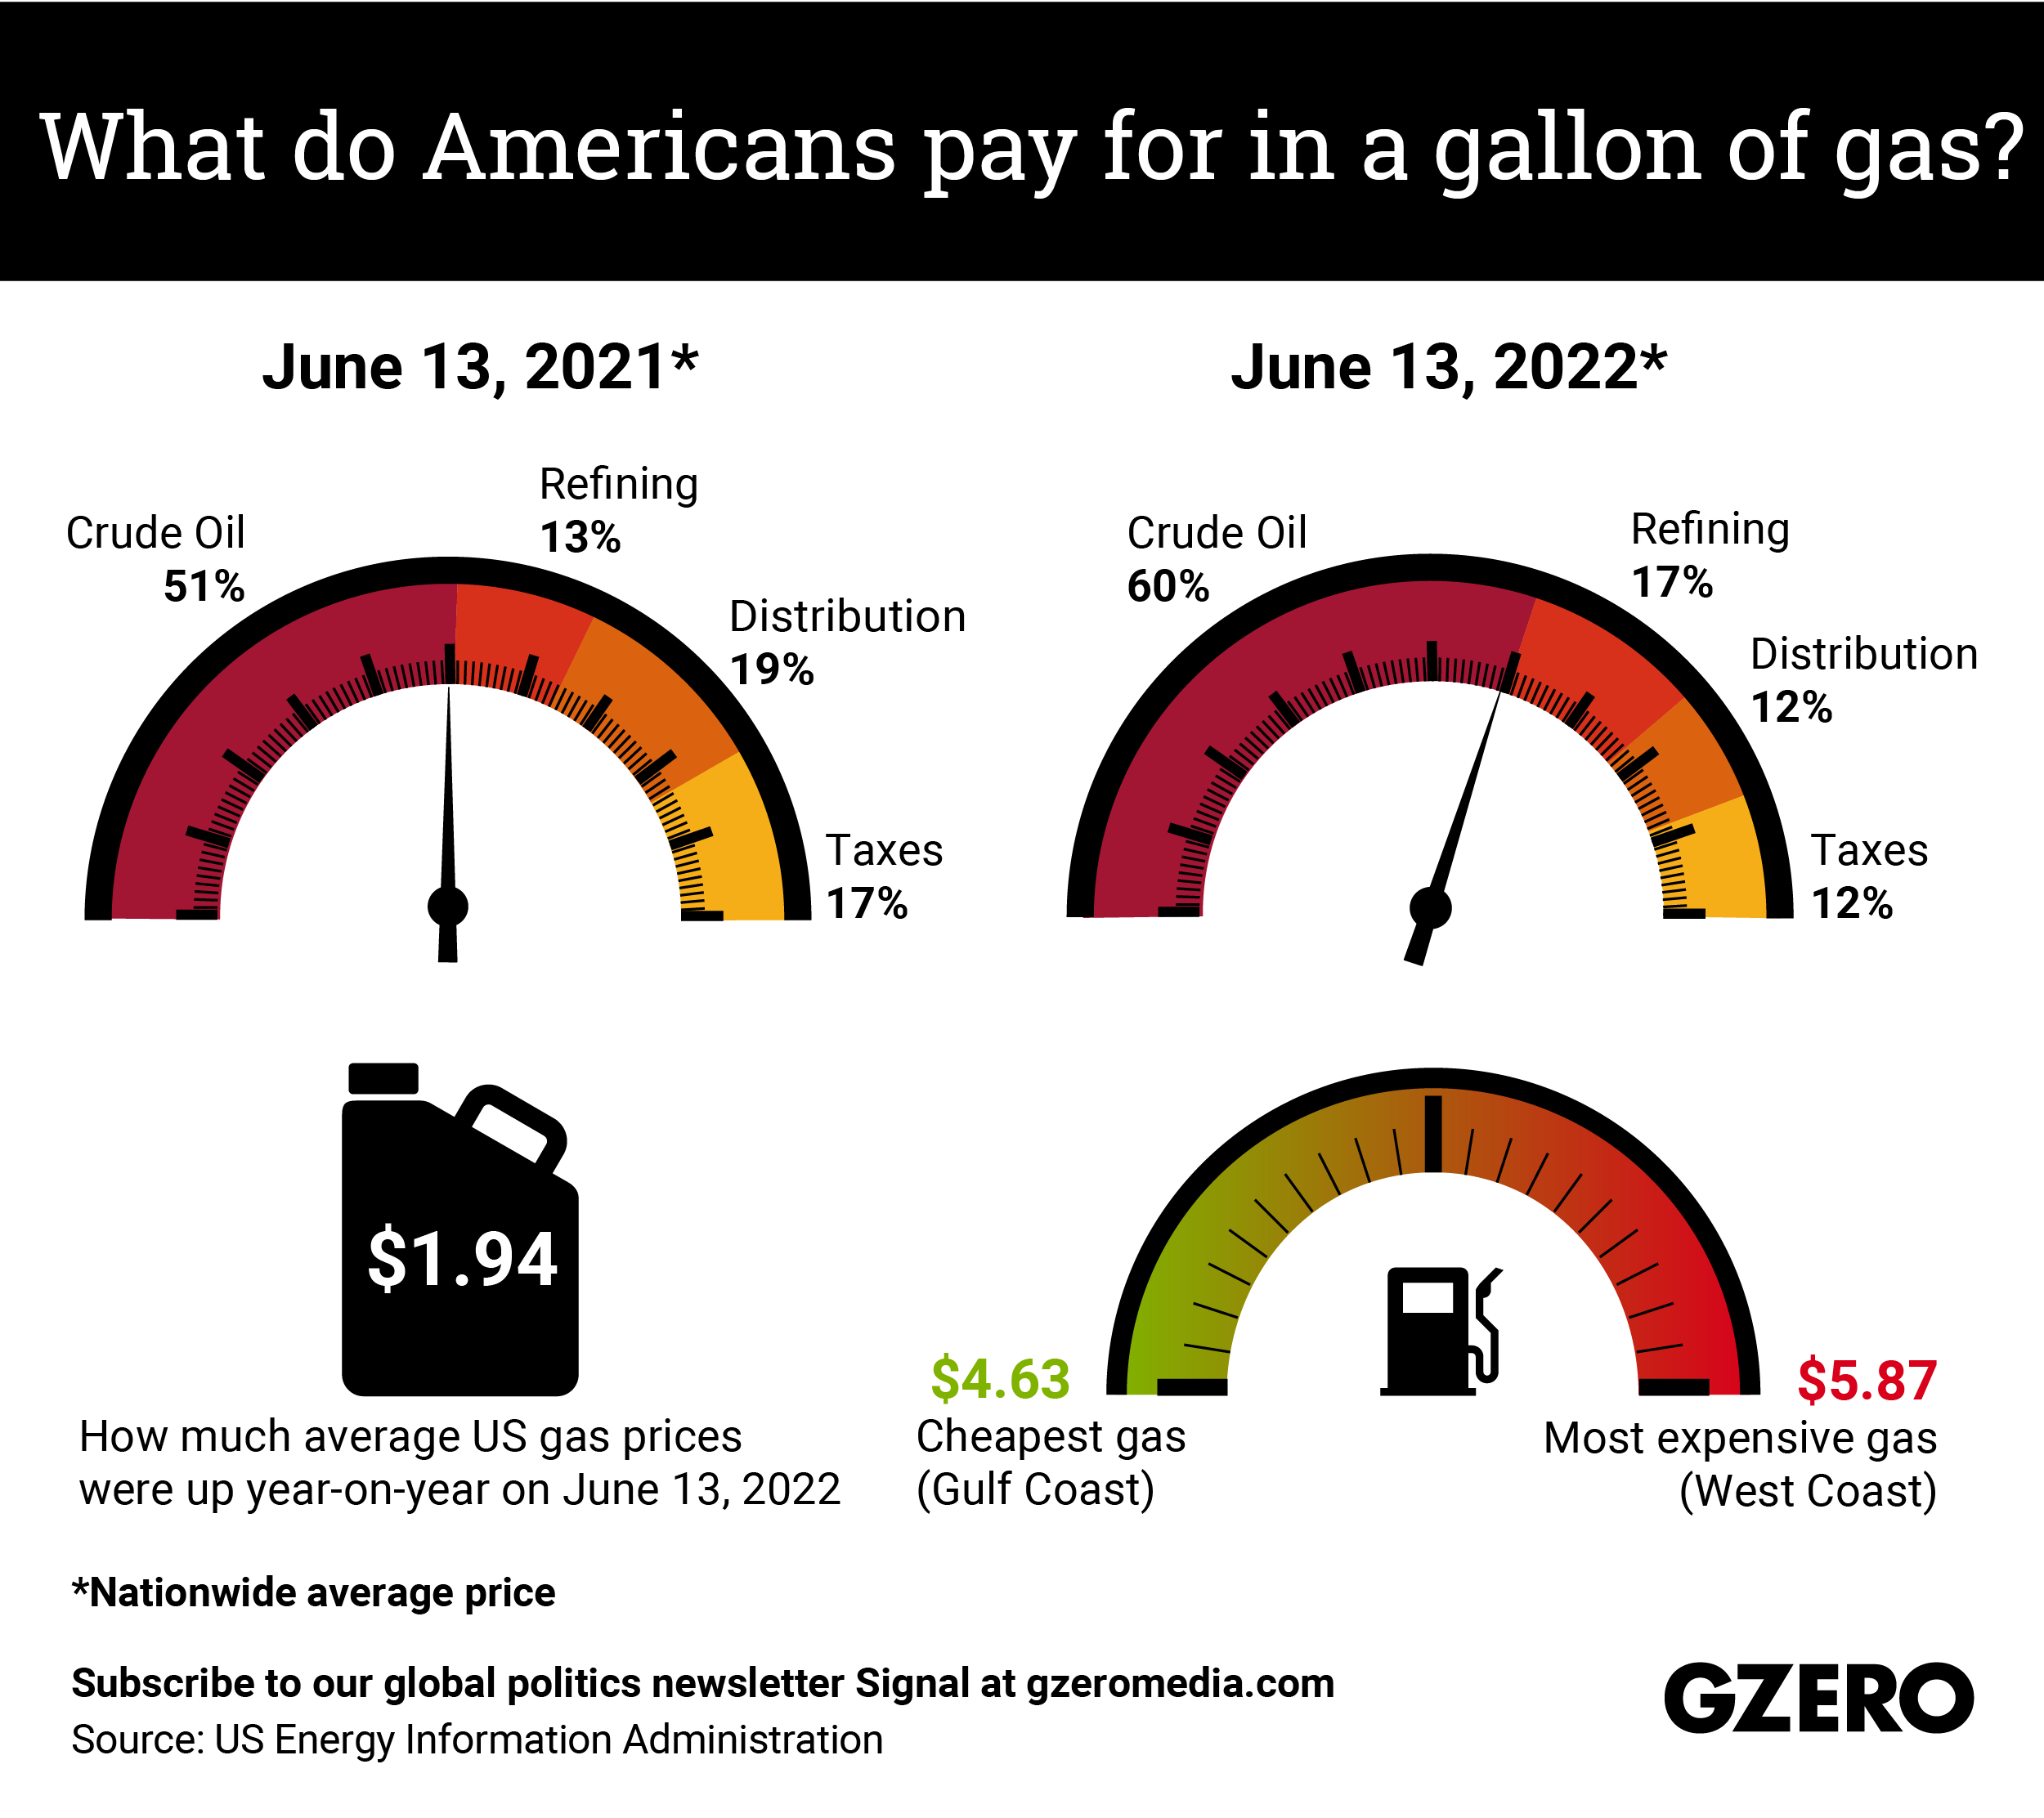 The Graphic Truth: What do Americans pay for in a gallon of gas?